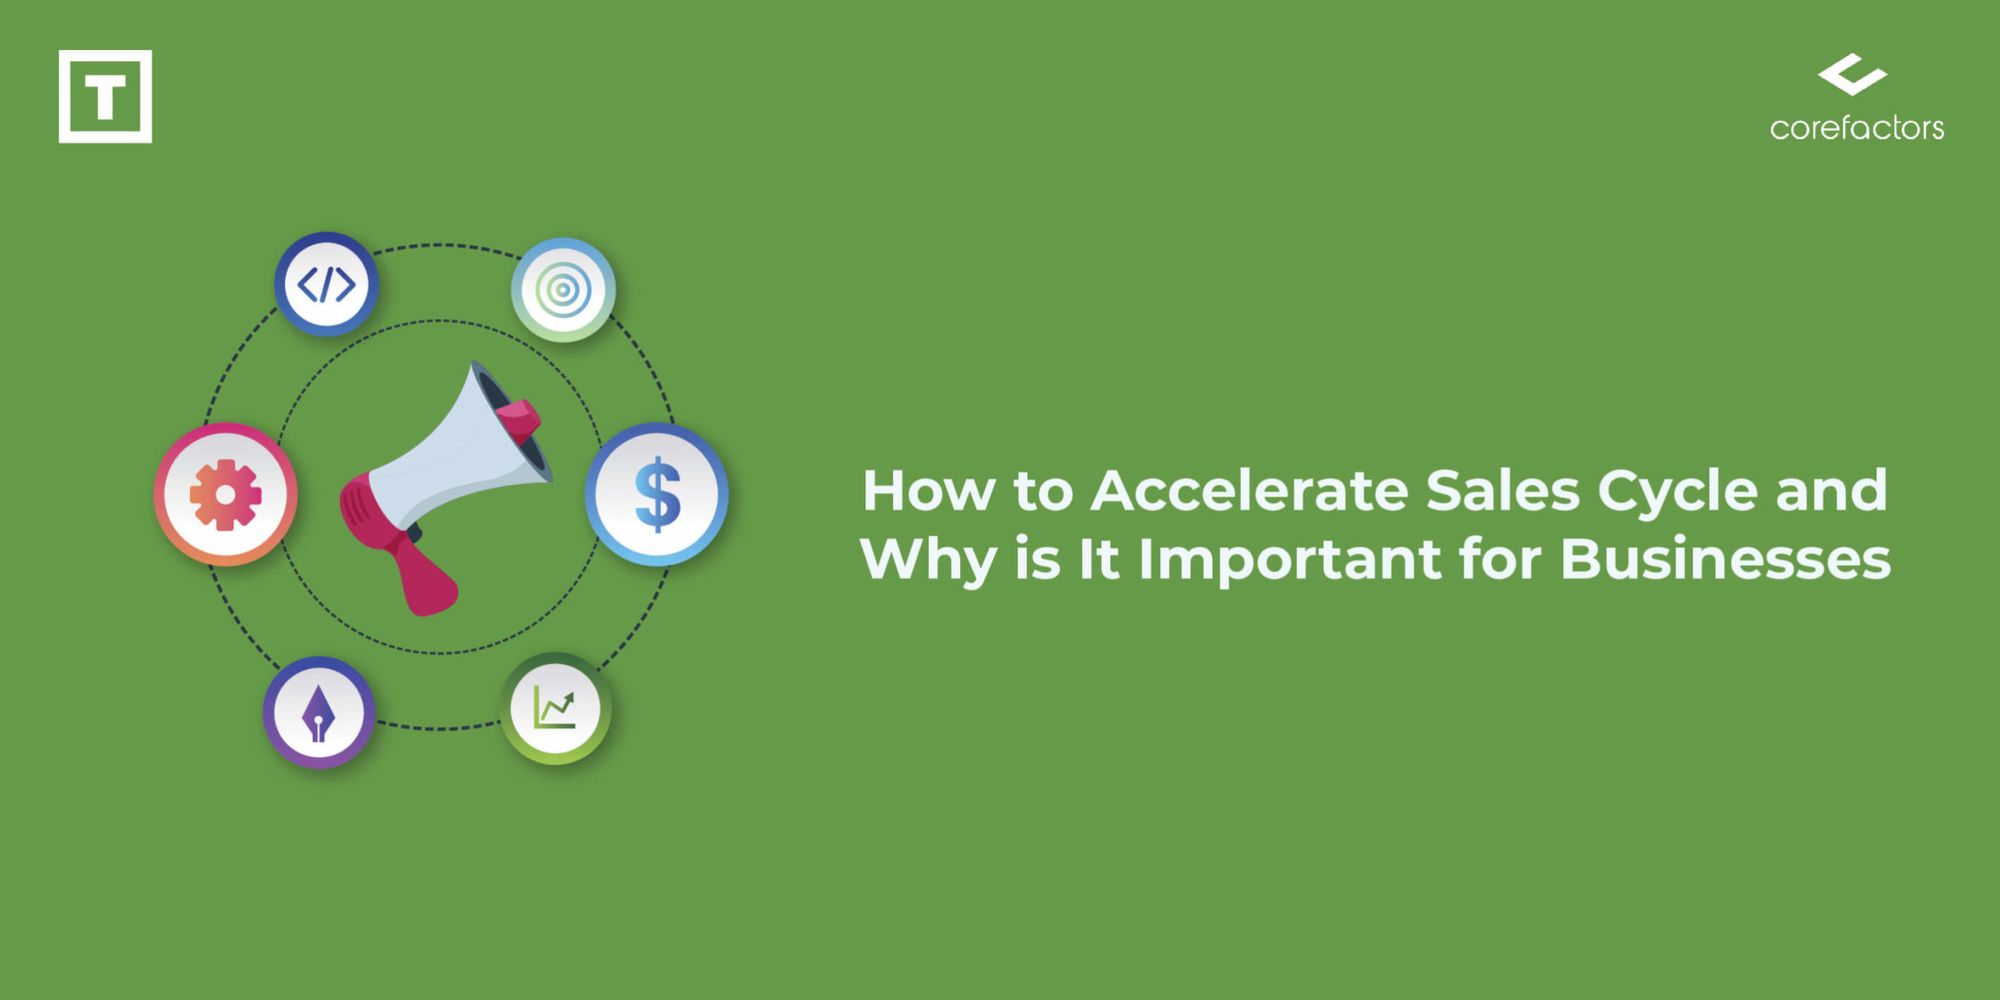 How To Accelerate Sales Cycle And Why Is It Important For Businesses